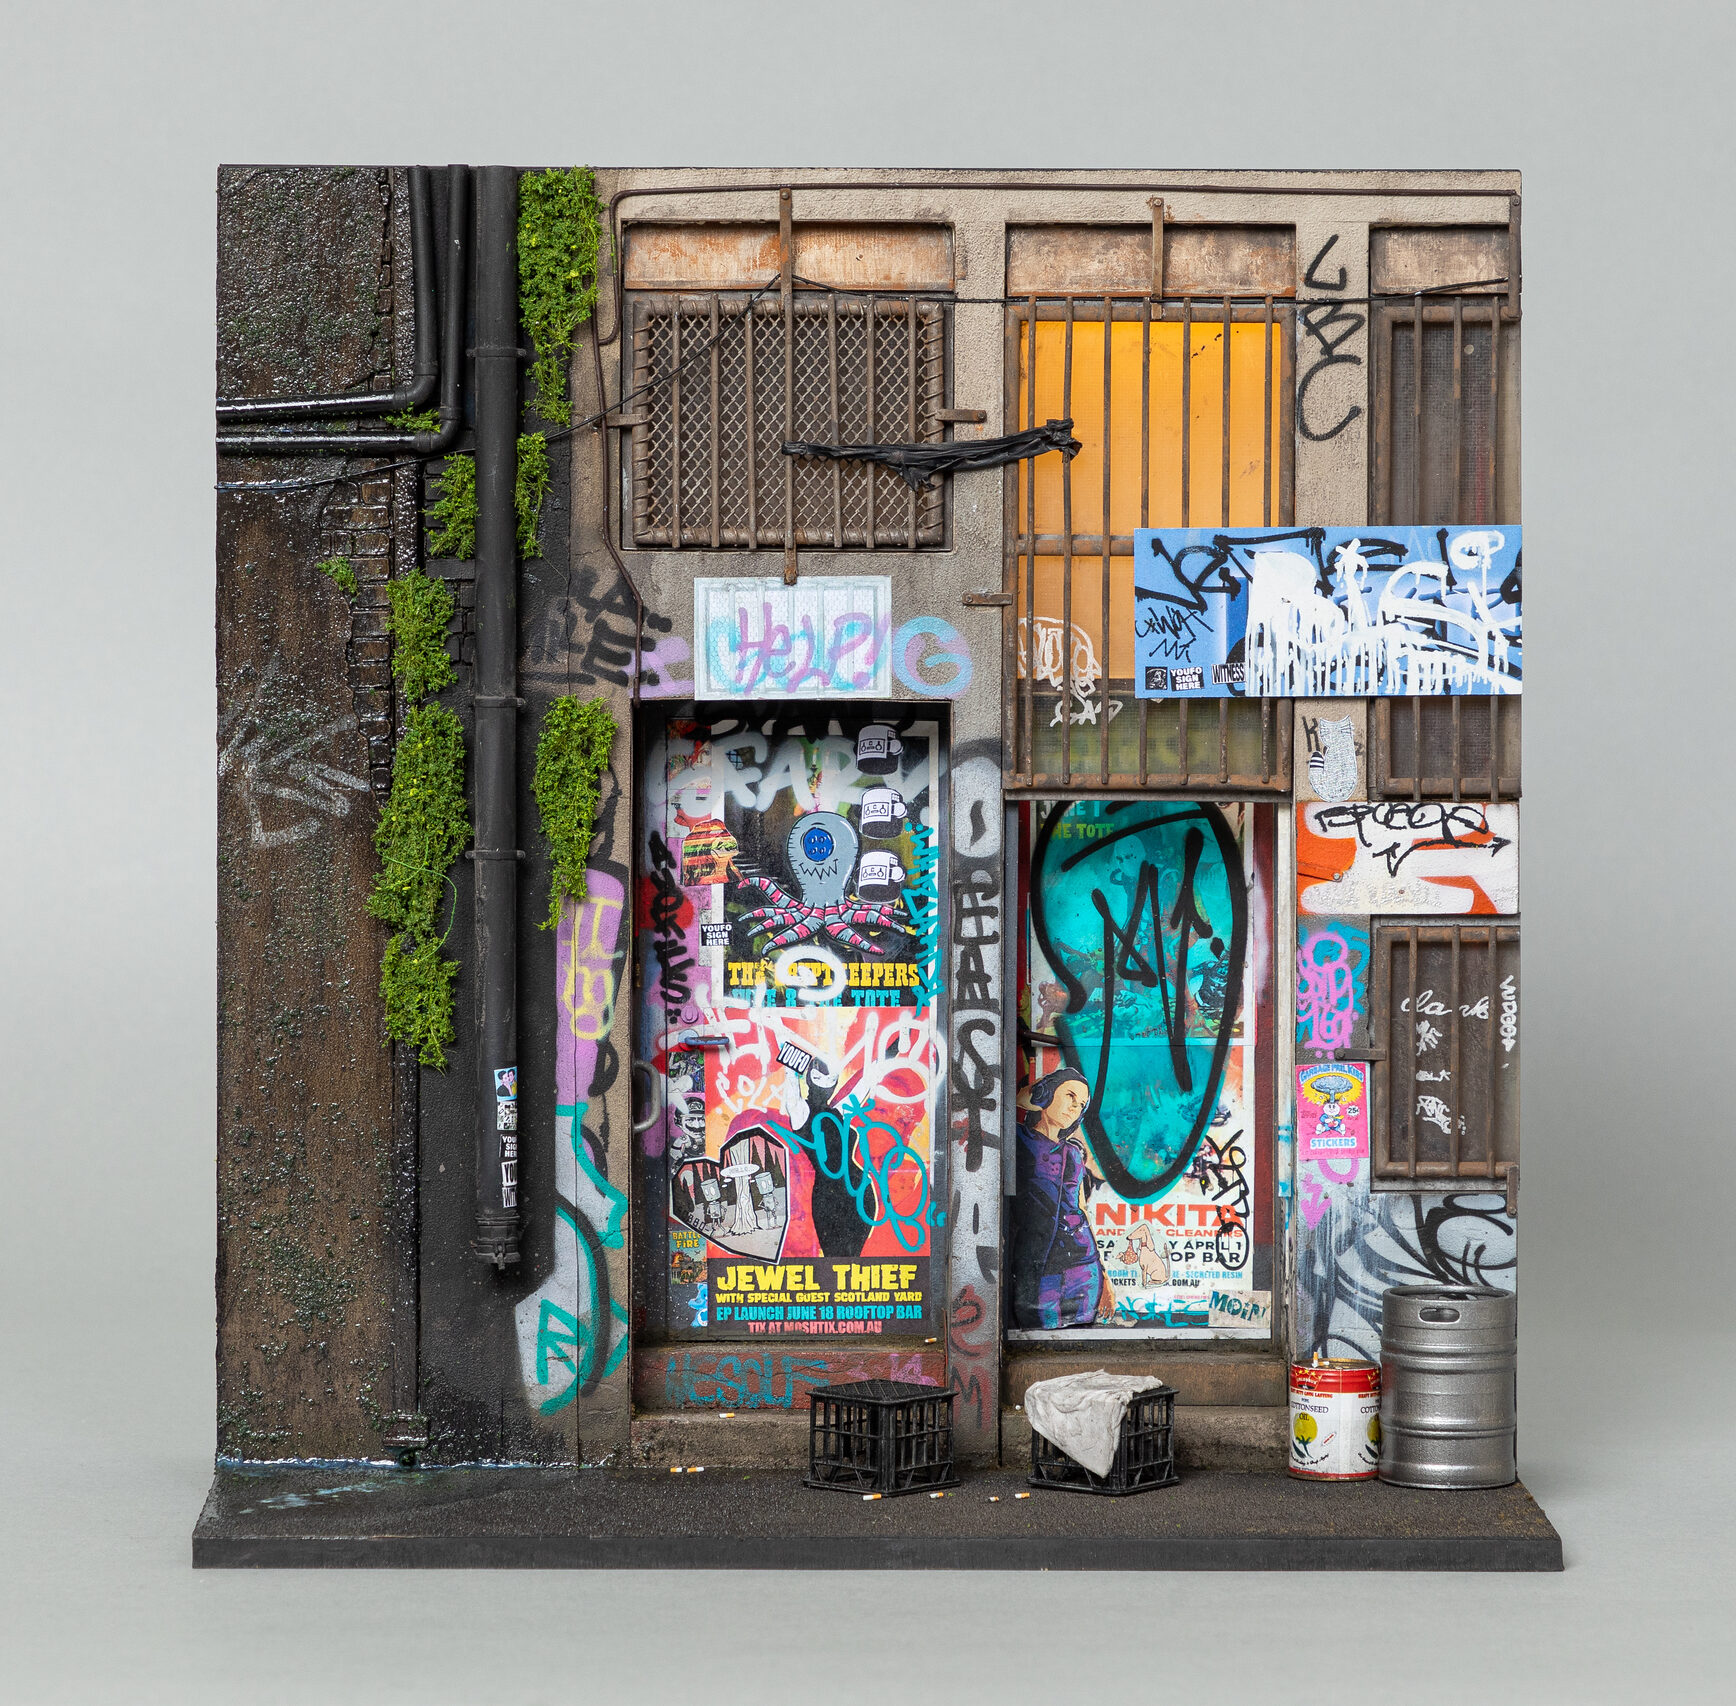 A 1:20 scale model of a building facade with lots of posters and graffiti on the doors, and moss growing near the pipes.